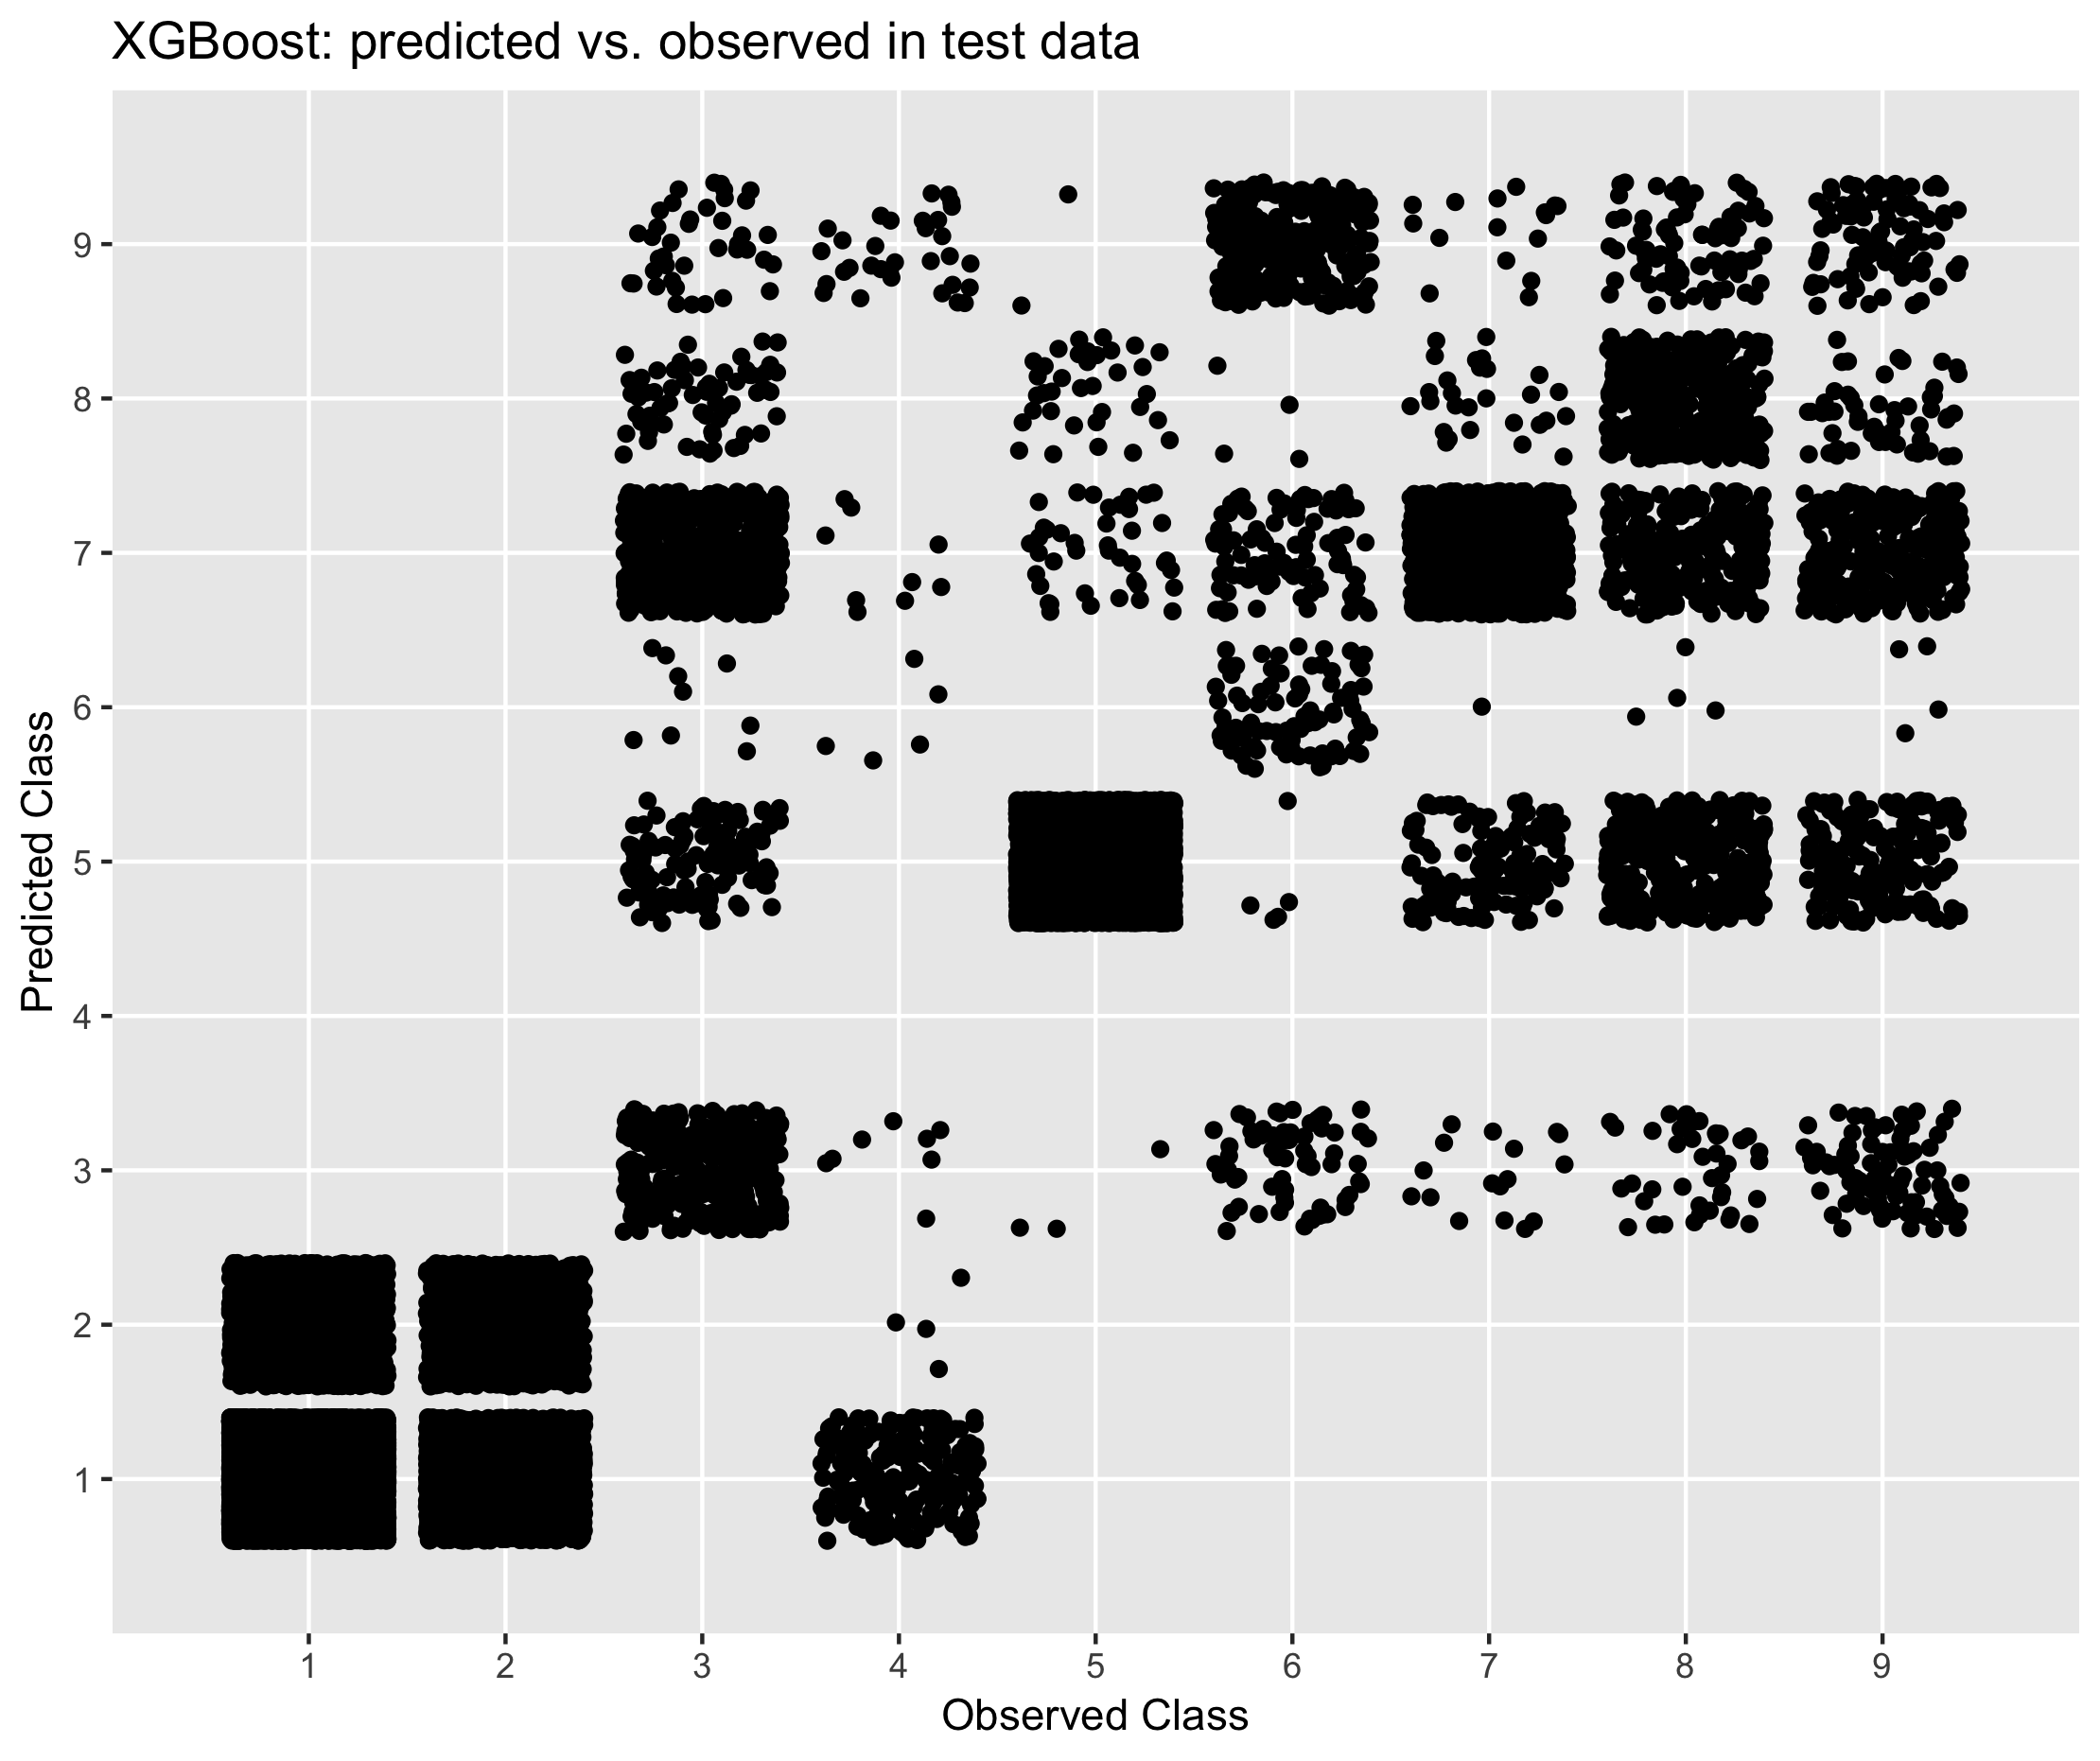 Figure 6.4. Performance of XGBoost in predicting economic activity